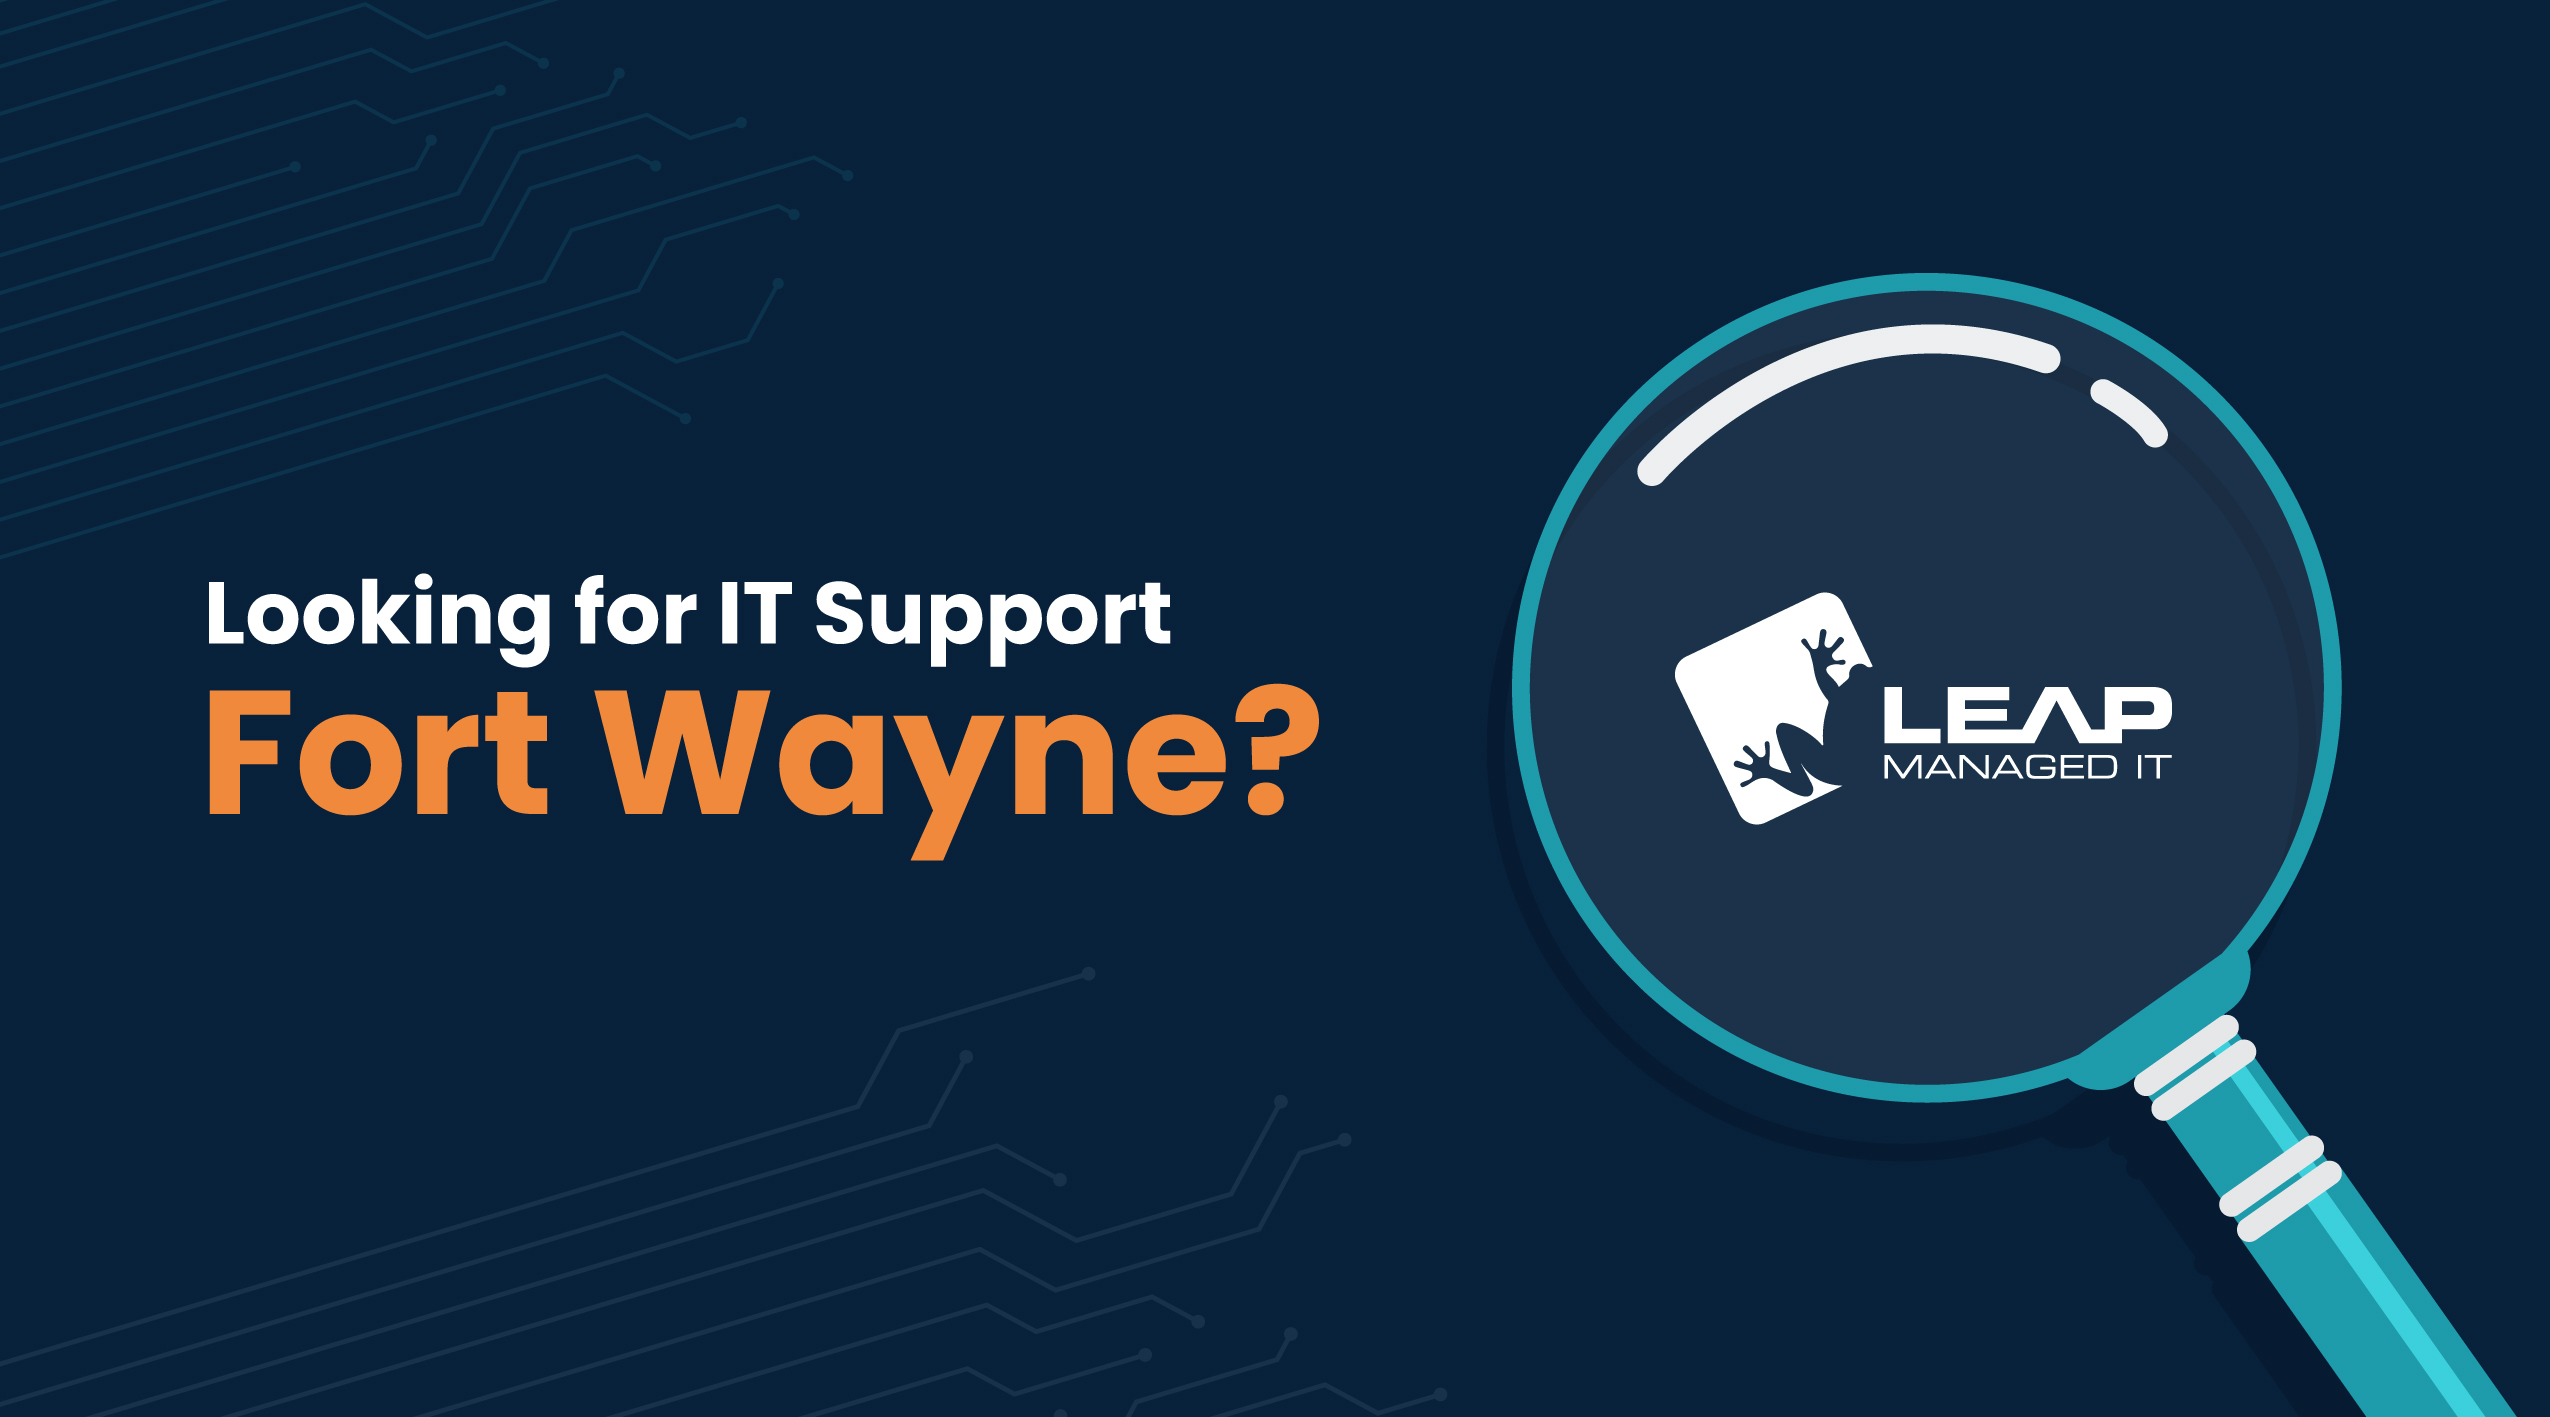 Looking for IT Support Fort Wayne?